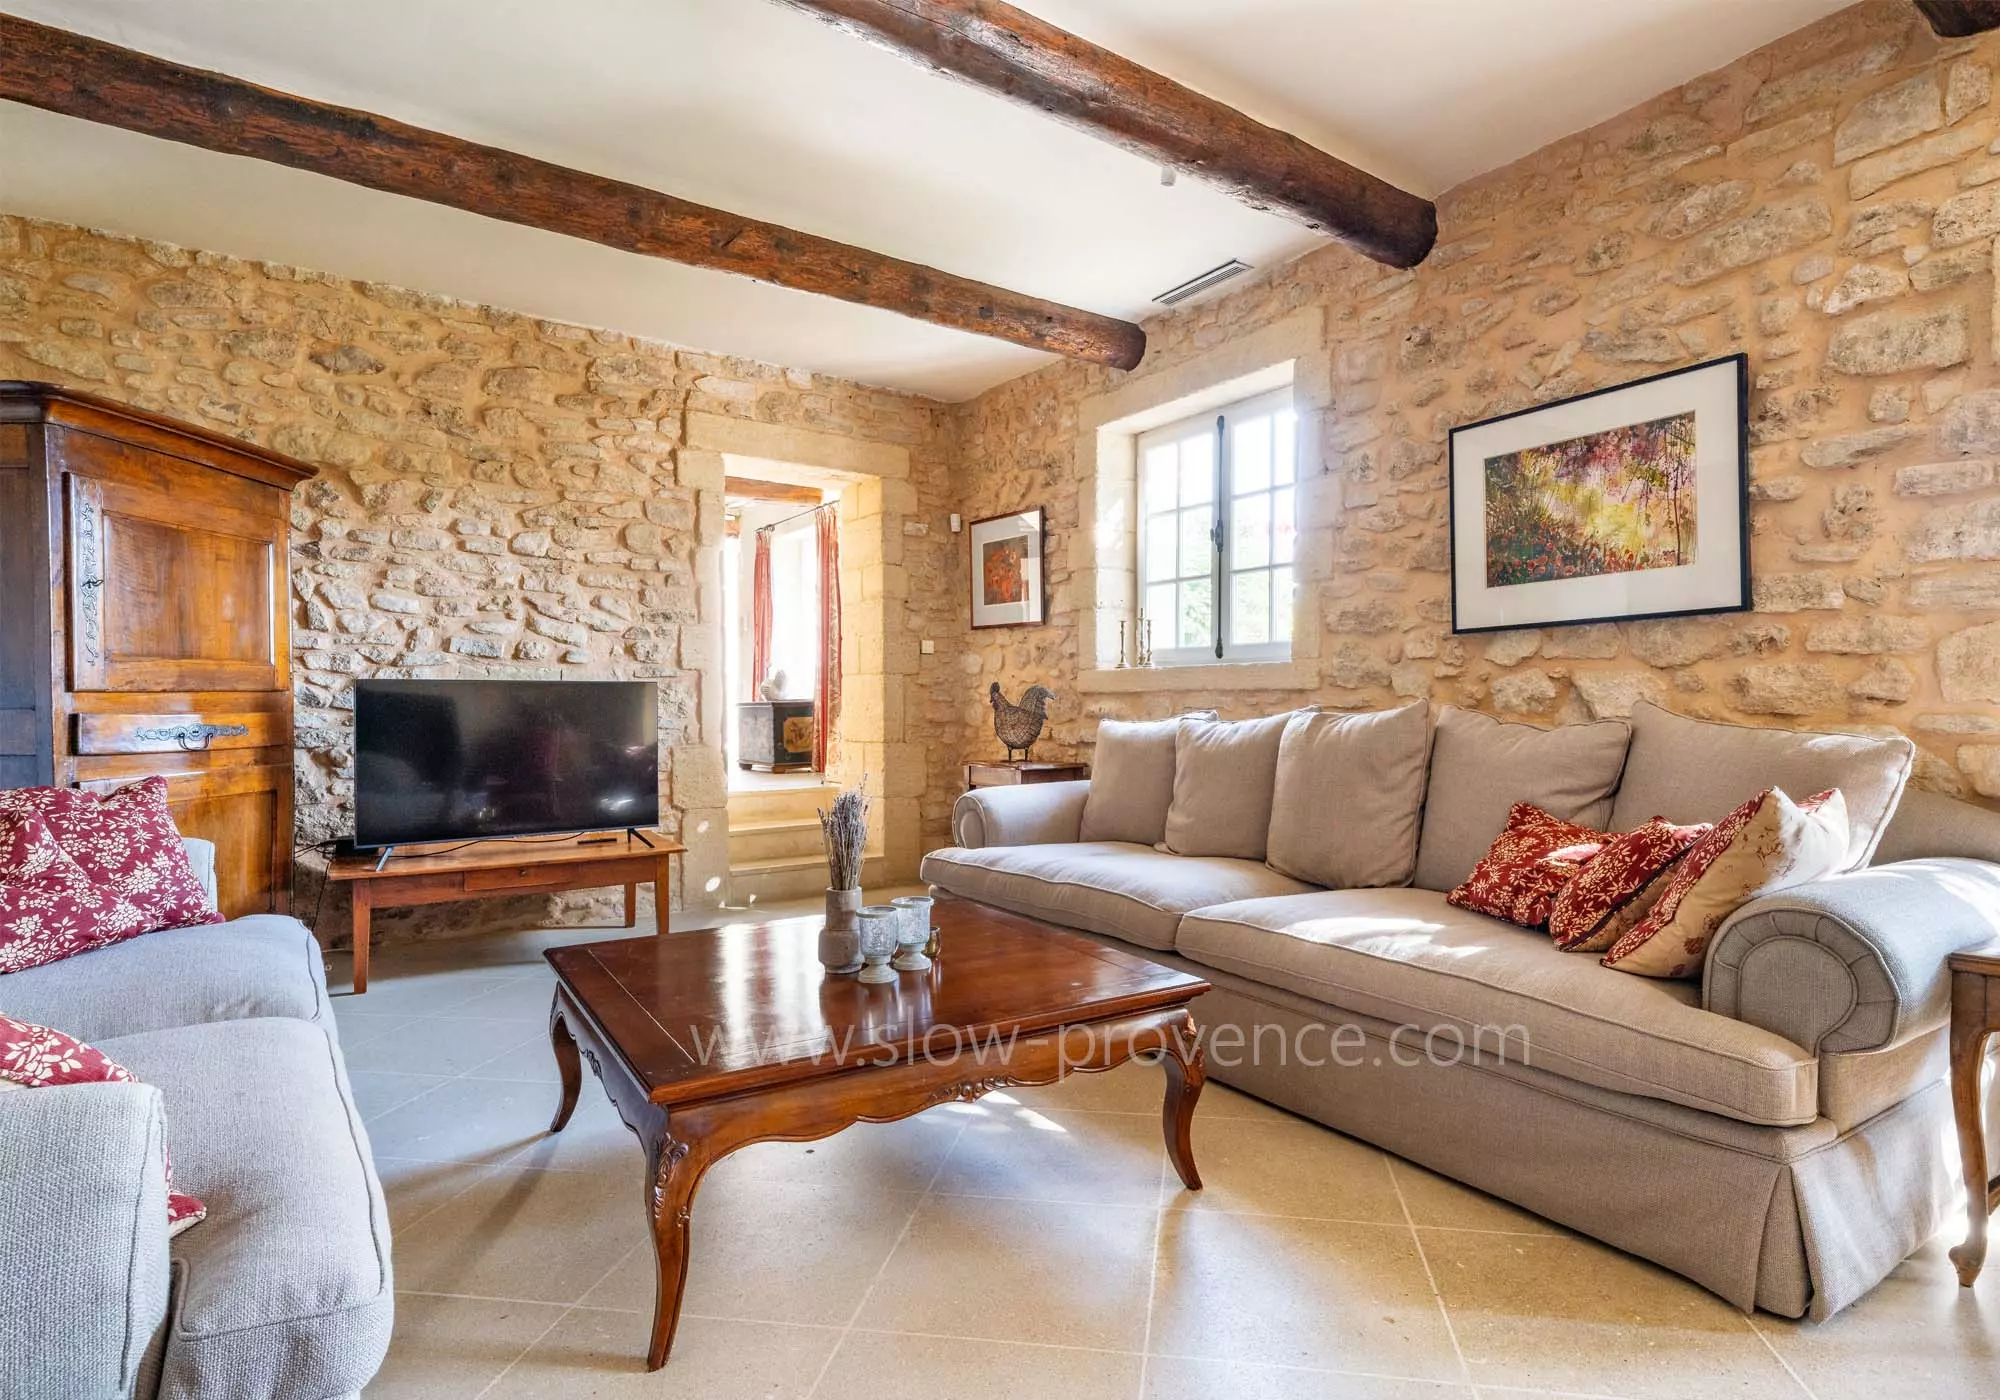 Comfortable living room with stone walls